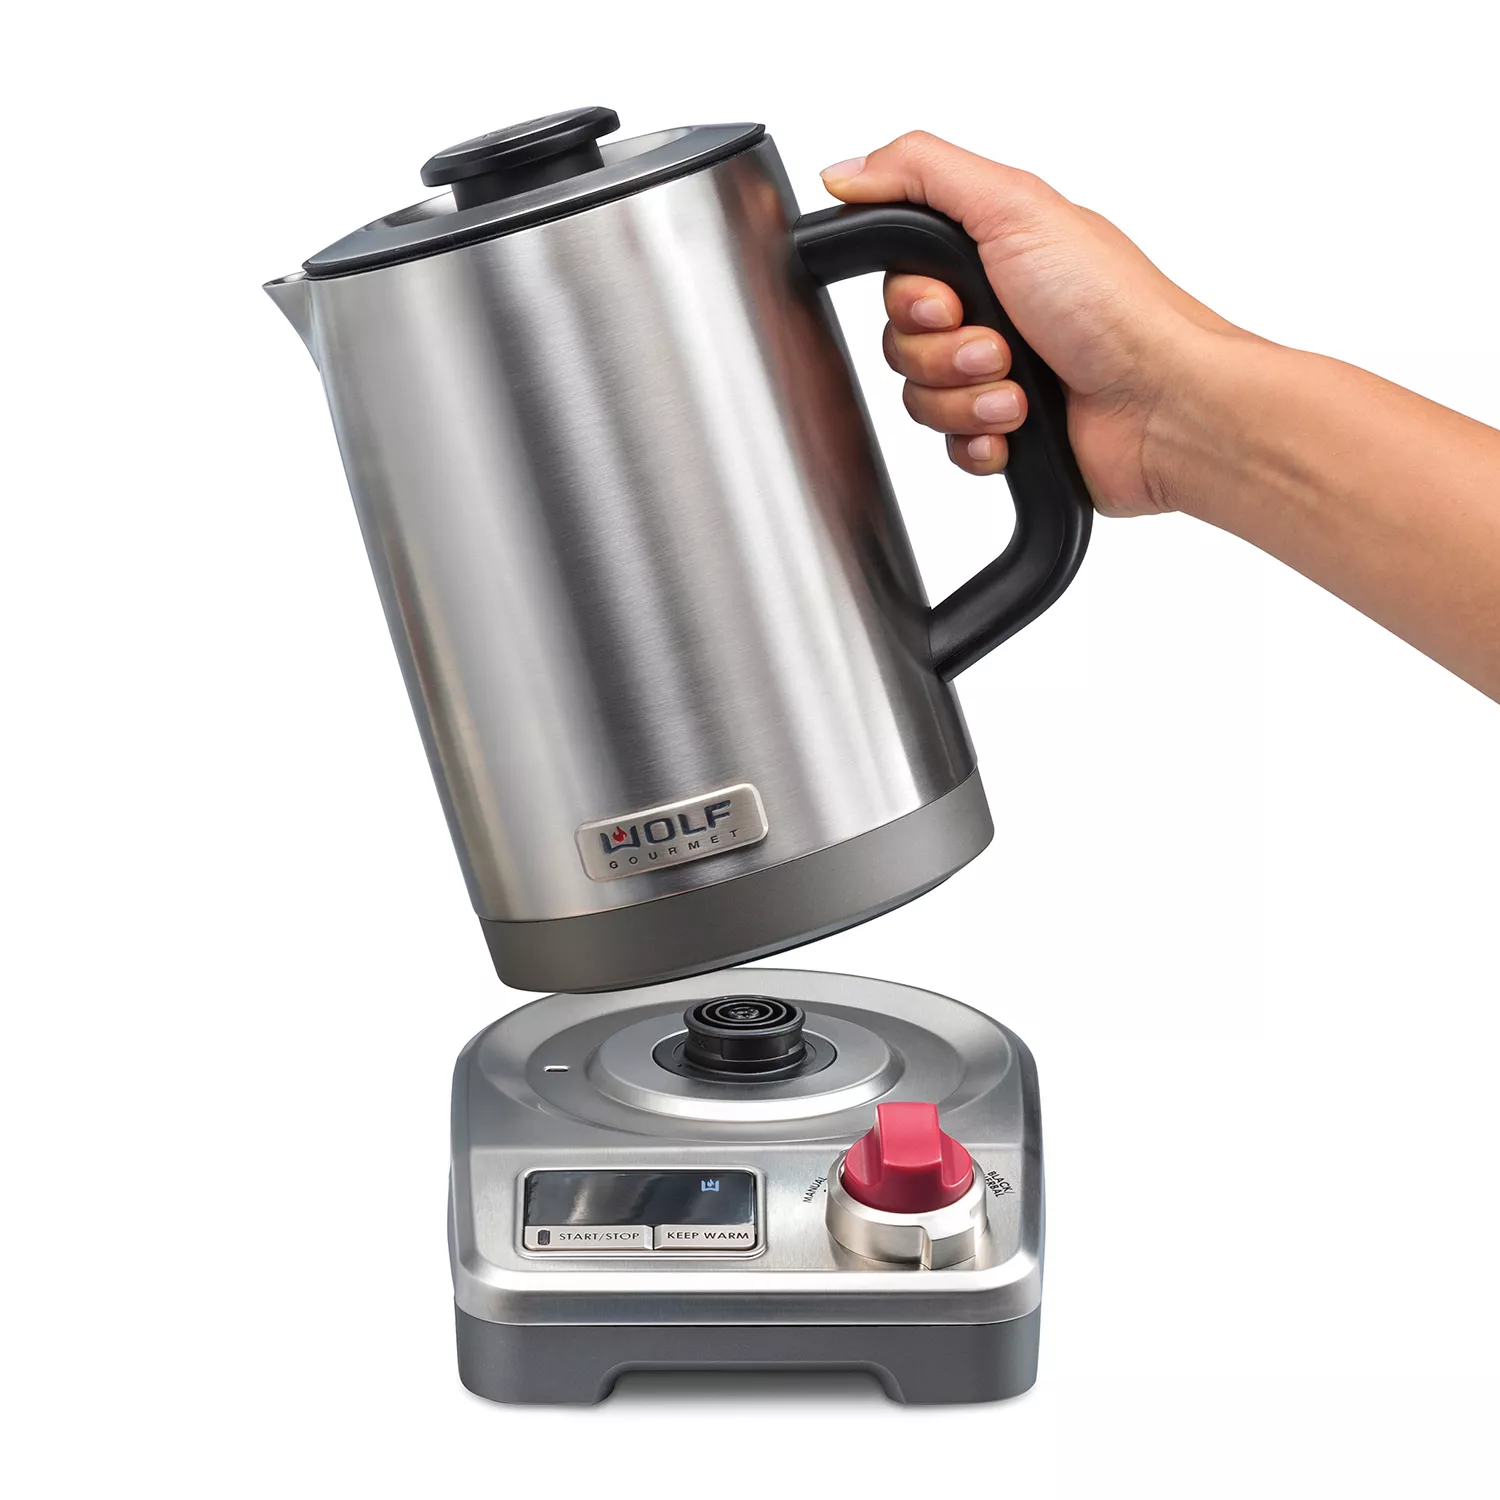 USED Breville IQ Electric Kettle, Brushed Stainless Steel